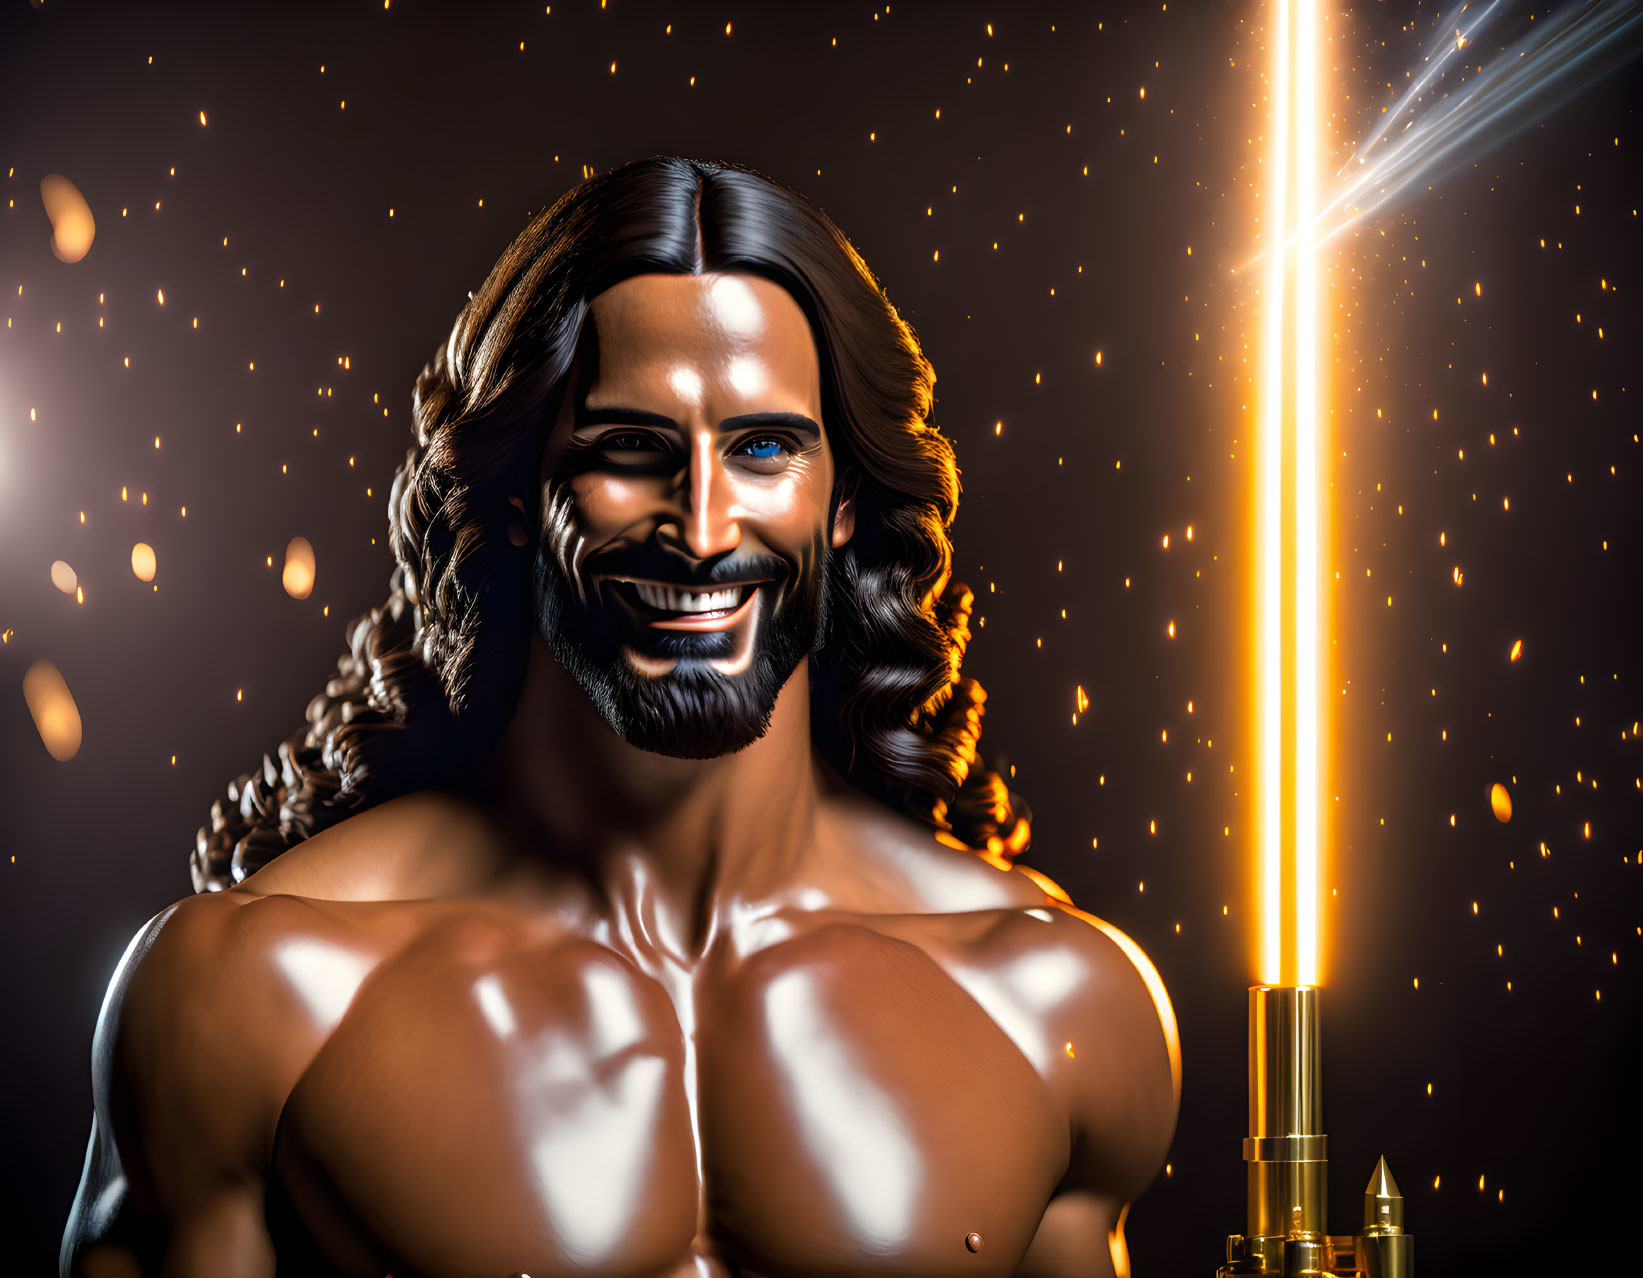 Muscular man illustration with long hair and golden background.